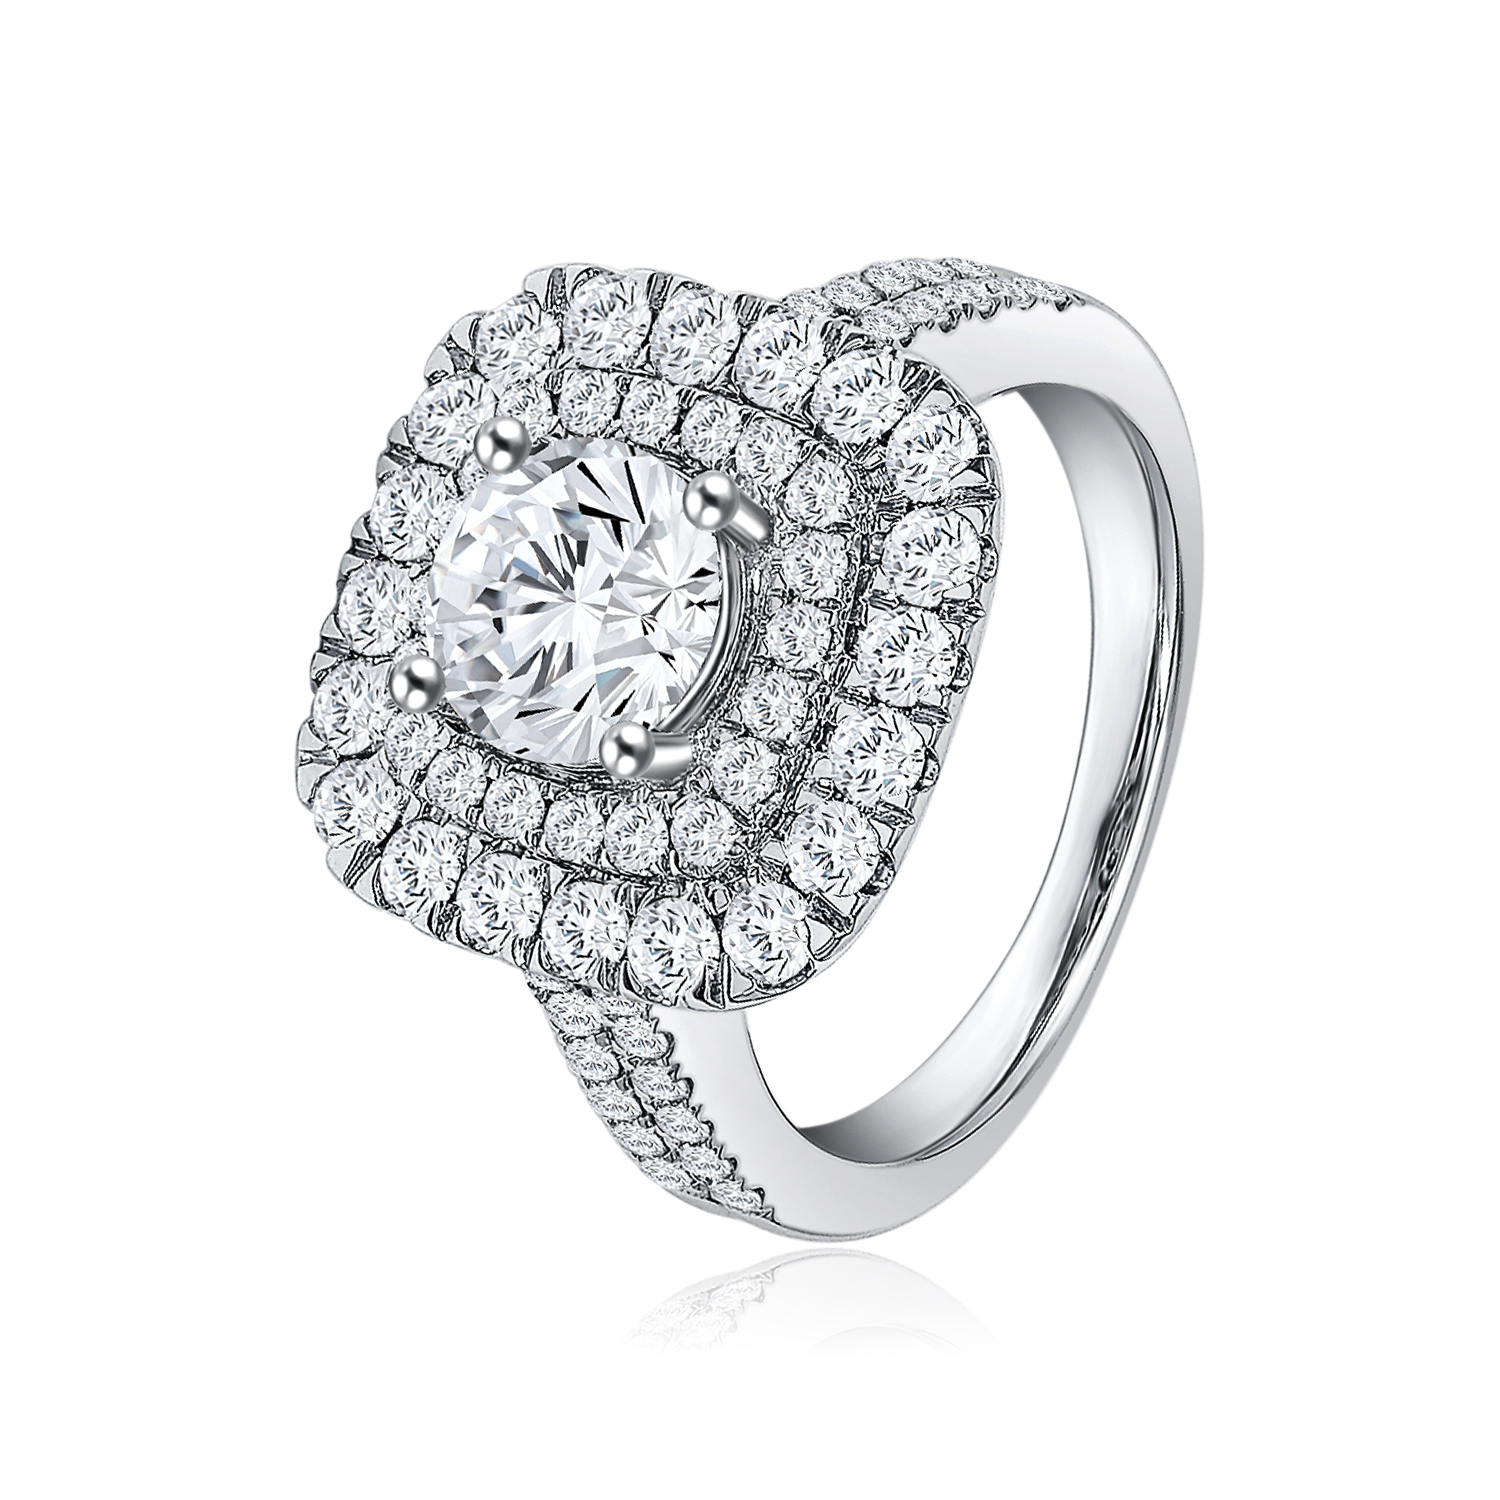 SK DIAMOND RING in a halo paved setting with lab grown diamonds in 18k white gold STAR CARAT FANCY GLIMMER